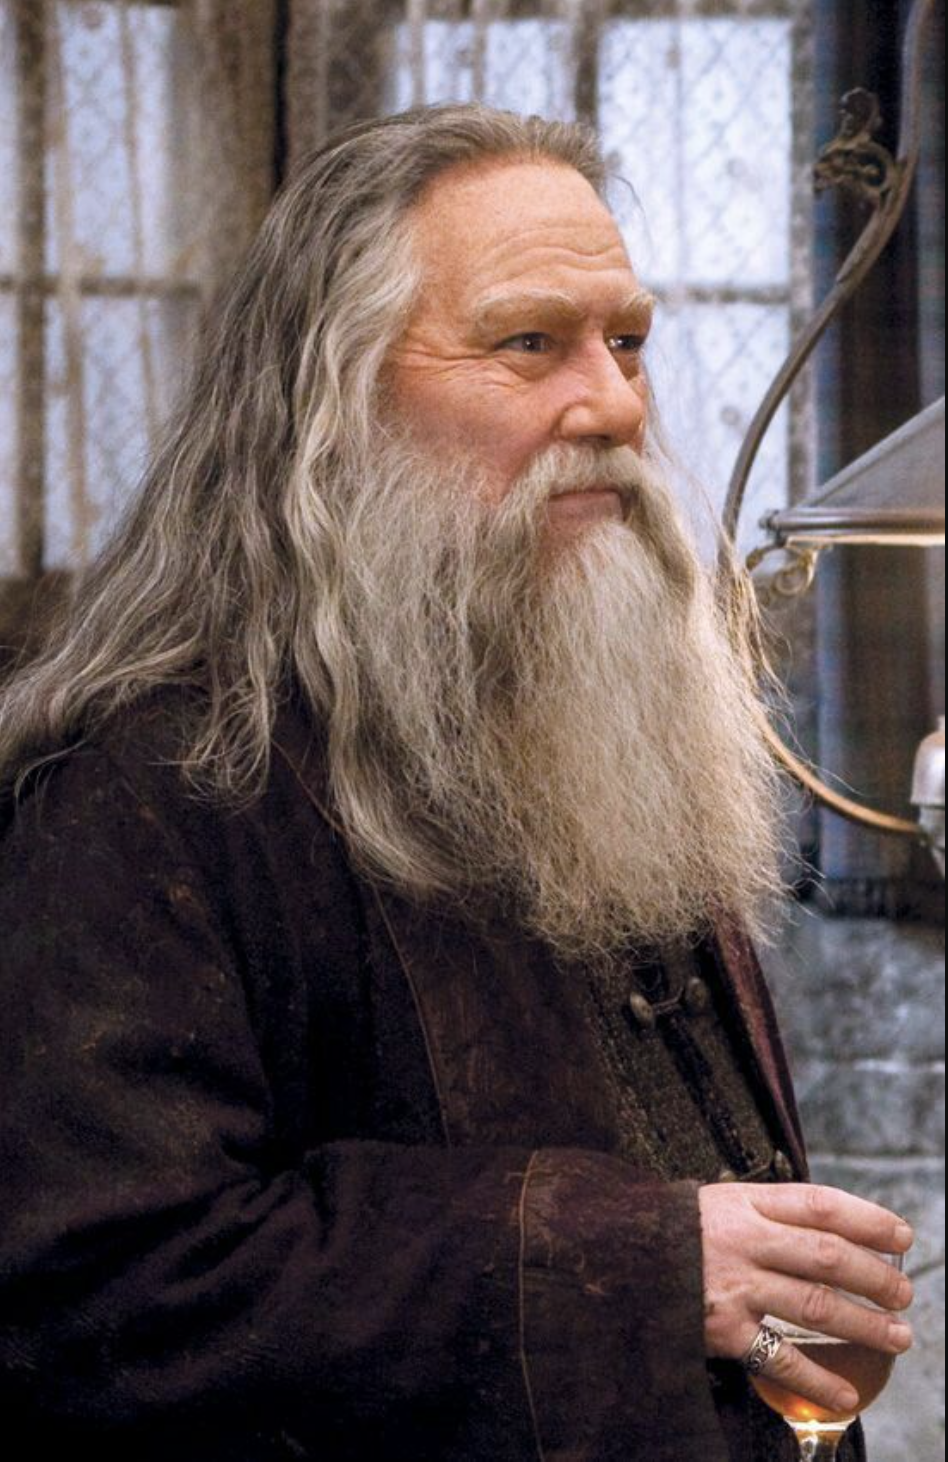 aberforth dumbledore drinking a glass of wine